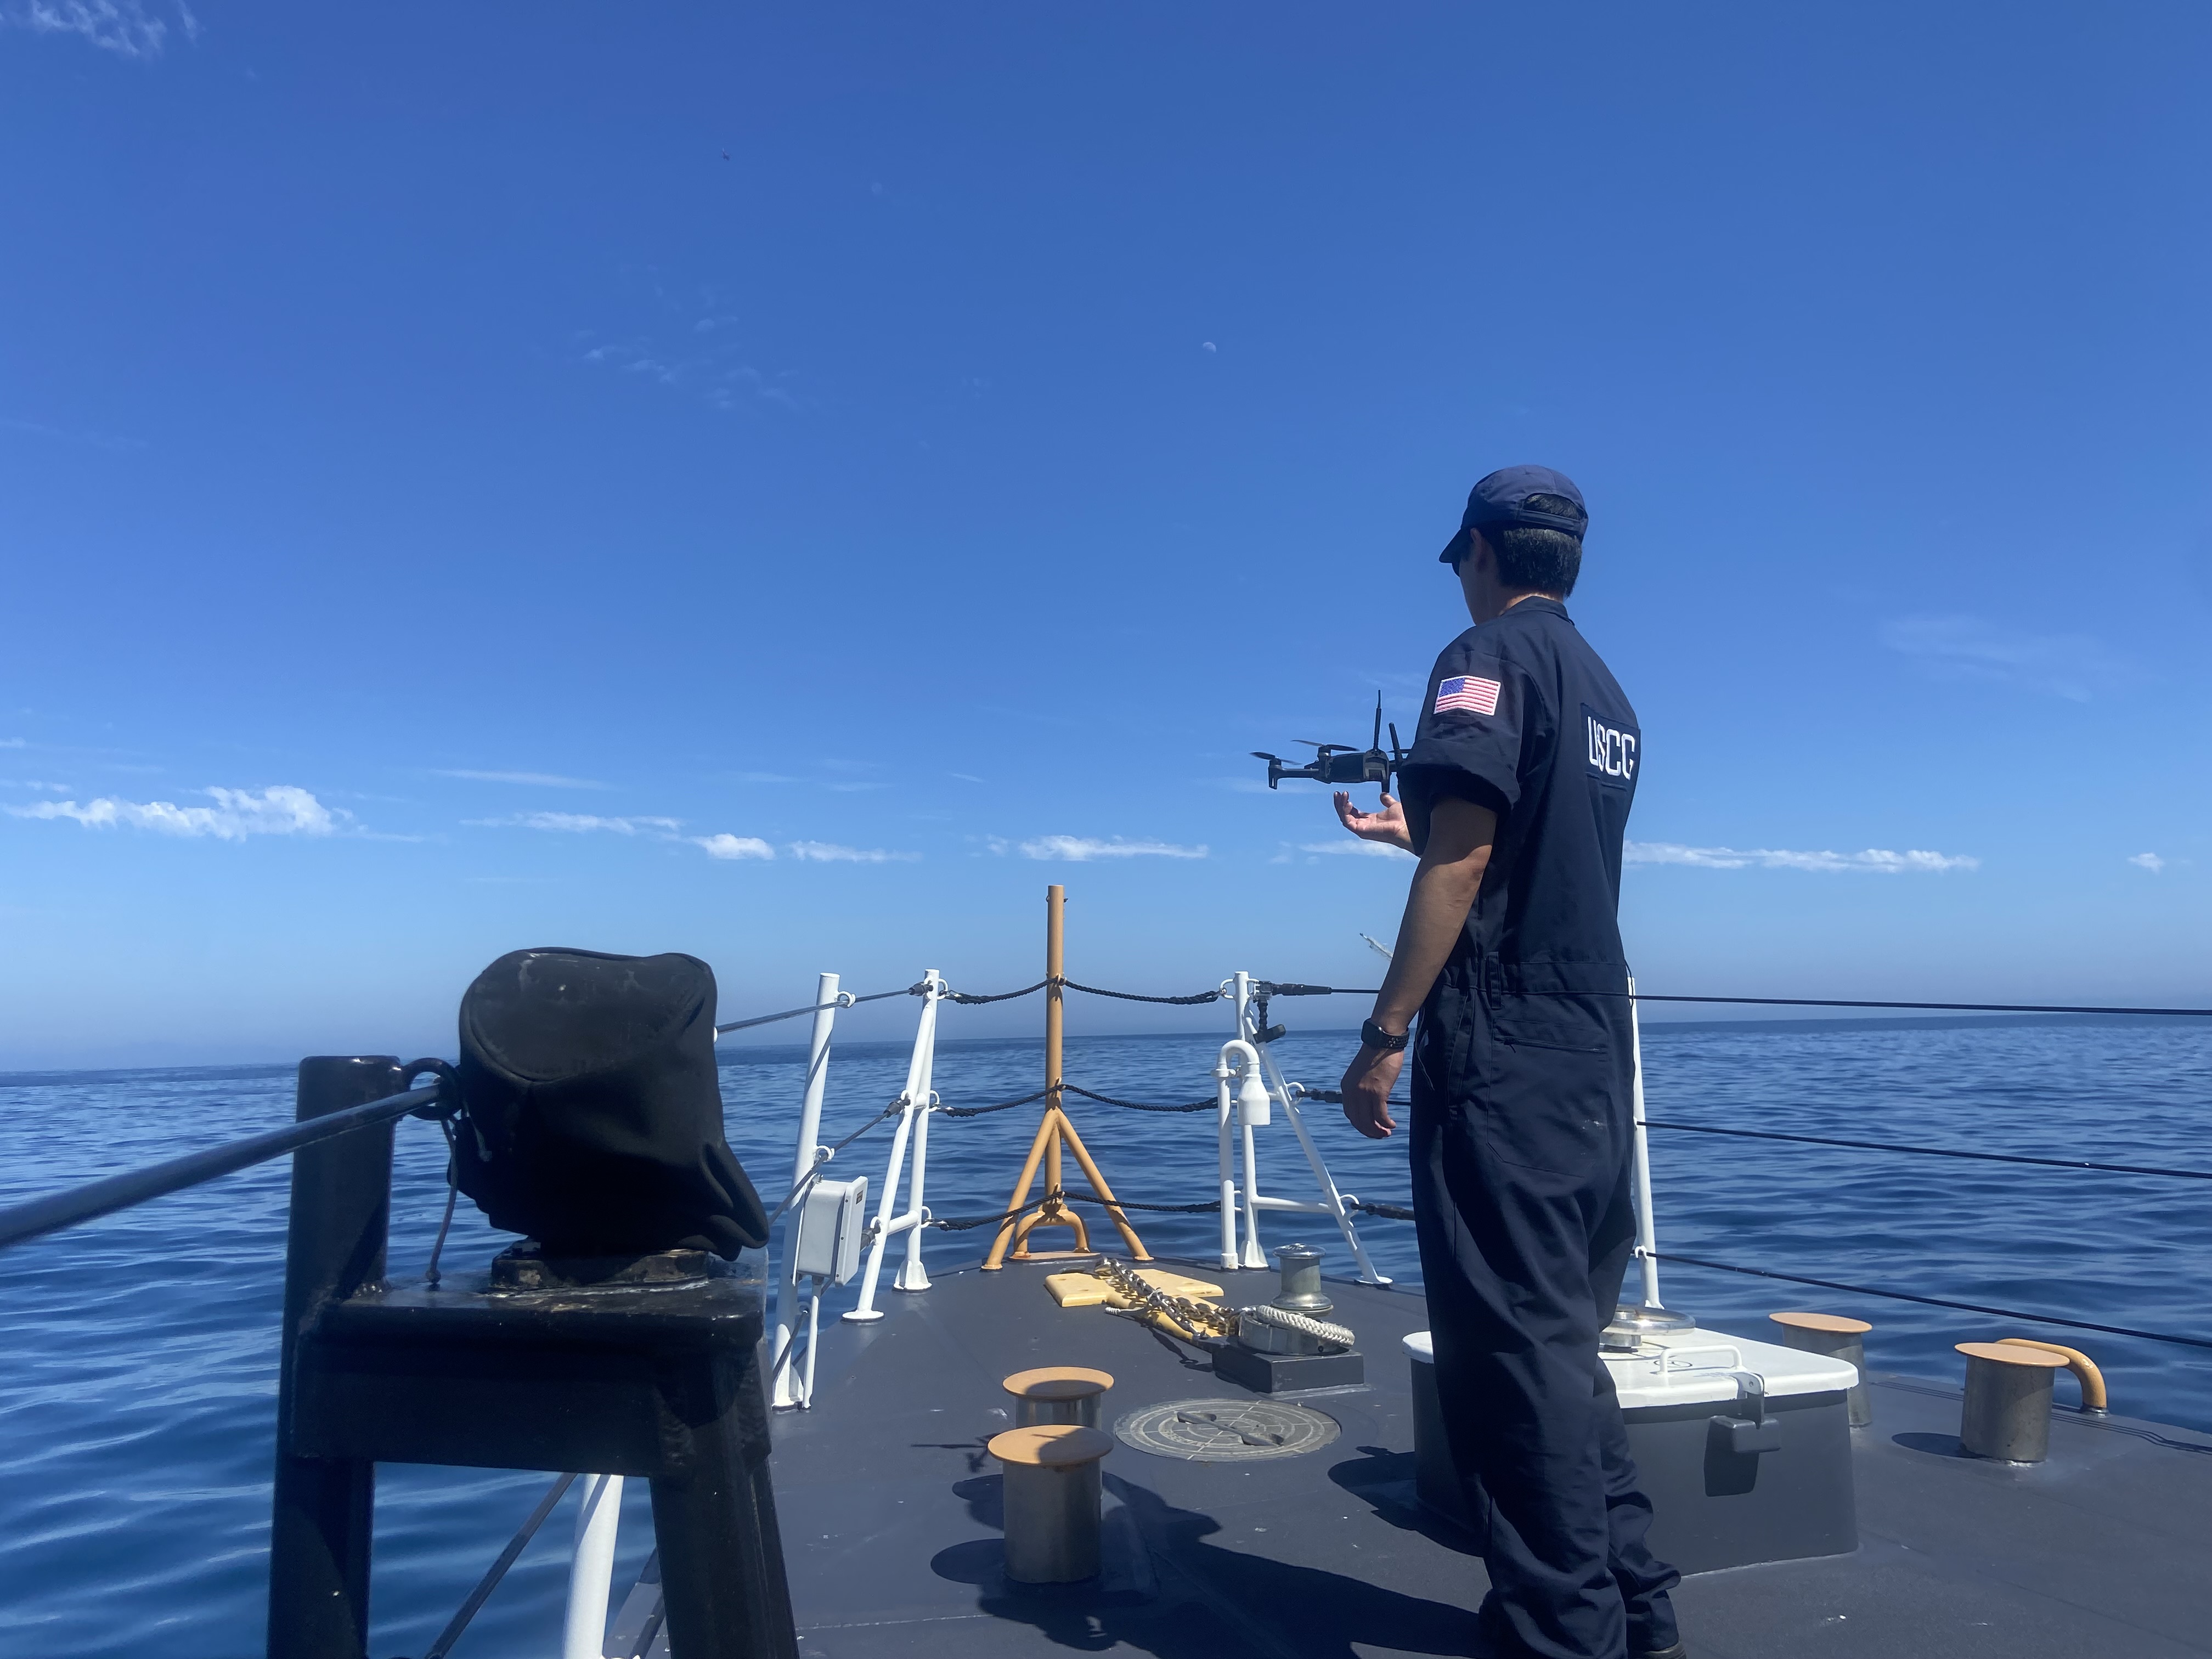 USCG UAS pilot, onboard the USCG Cutter Blackfin, completes a test flight by catching a drone after its flight over an oil slick off the Santa Barbara Coast. (Image Credit: NOAA). 